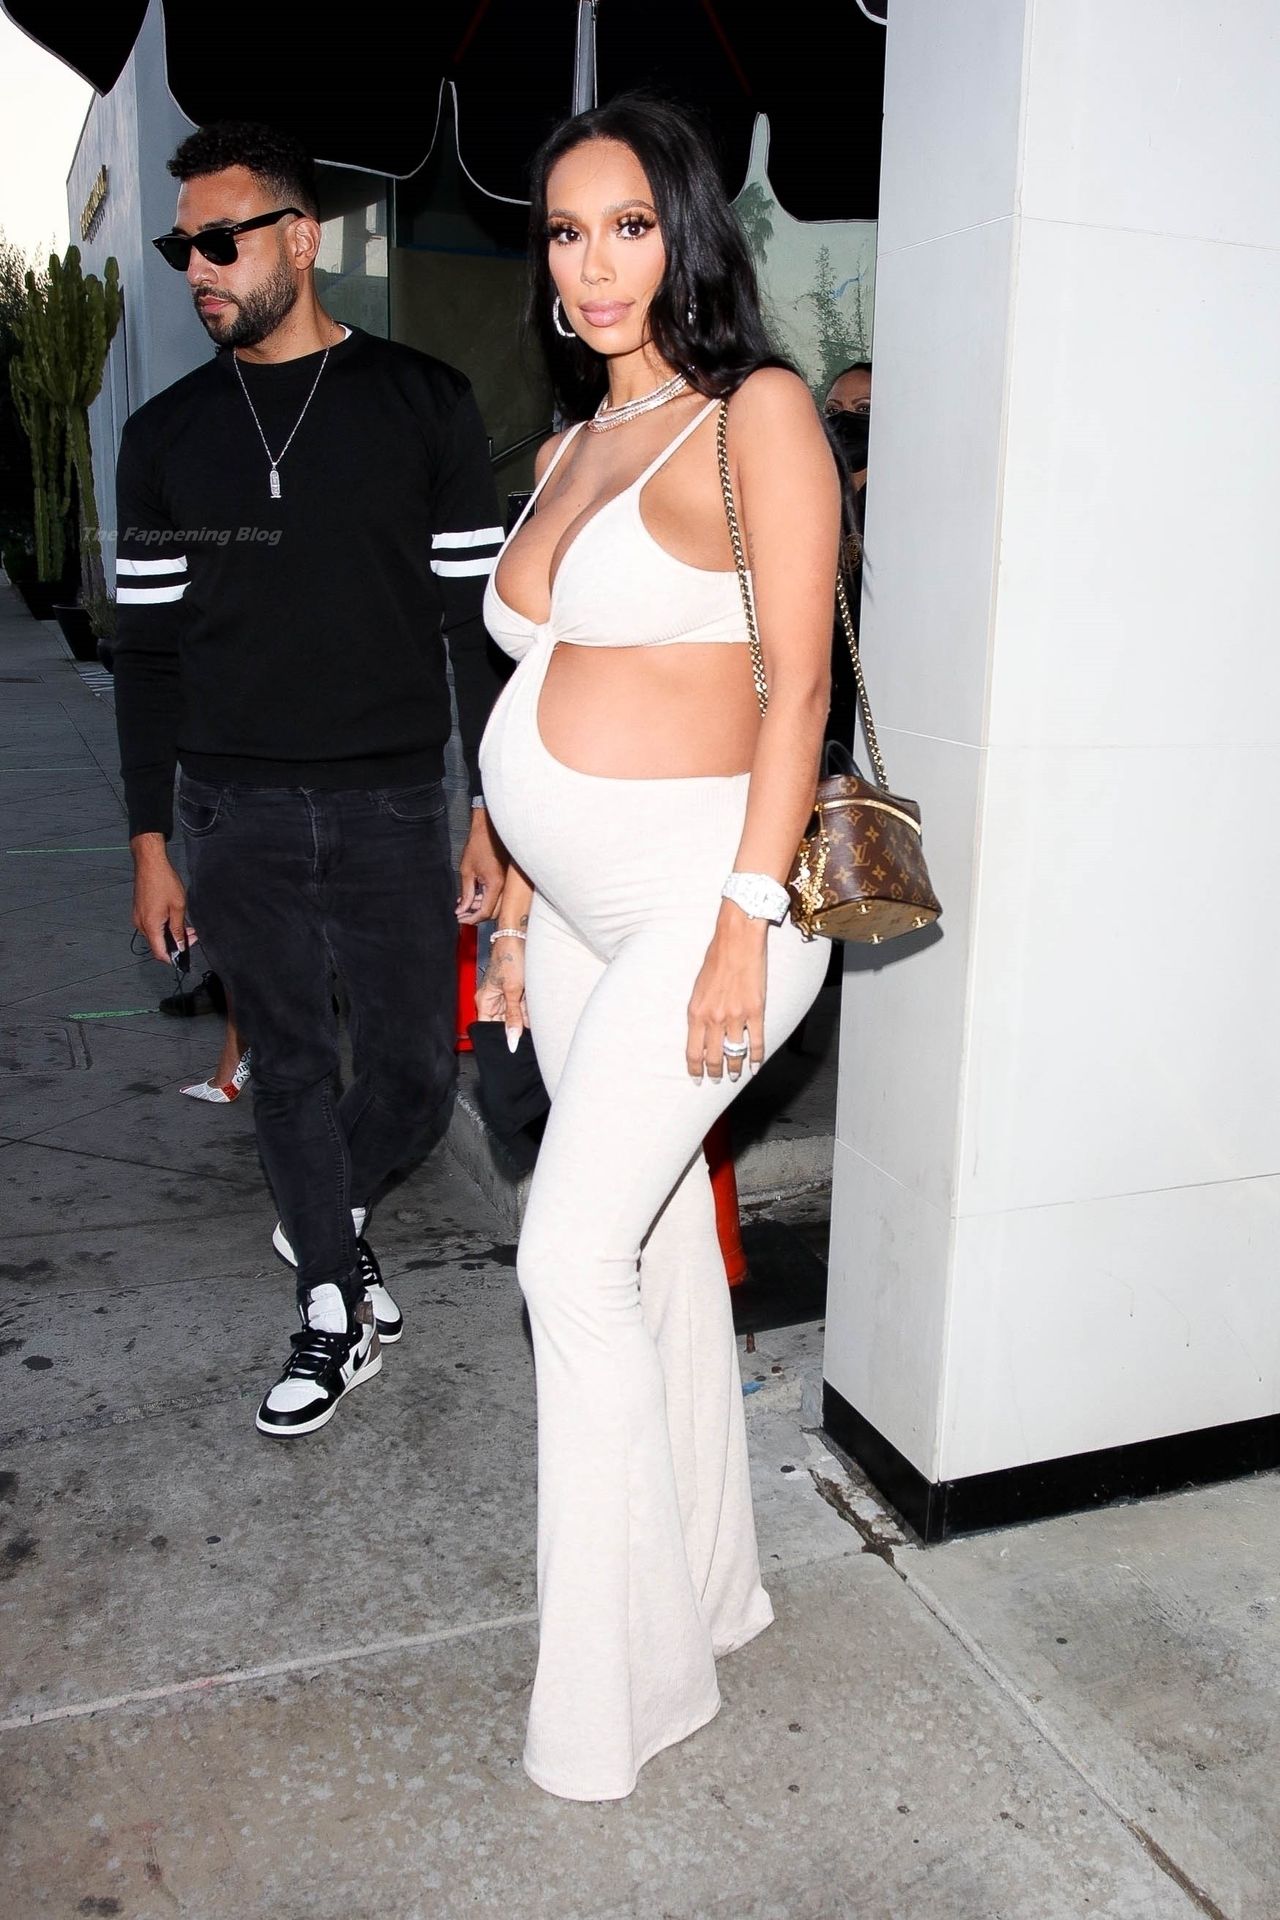 Erica Mena Flaunts Her Pregnant Boobs in a Revealing Outfit at Catch LA (29...